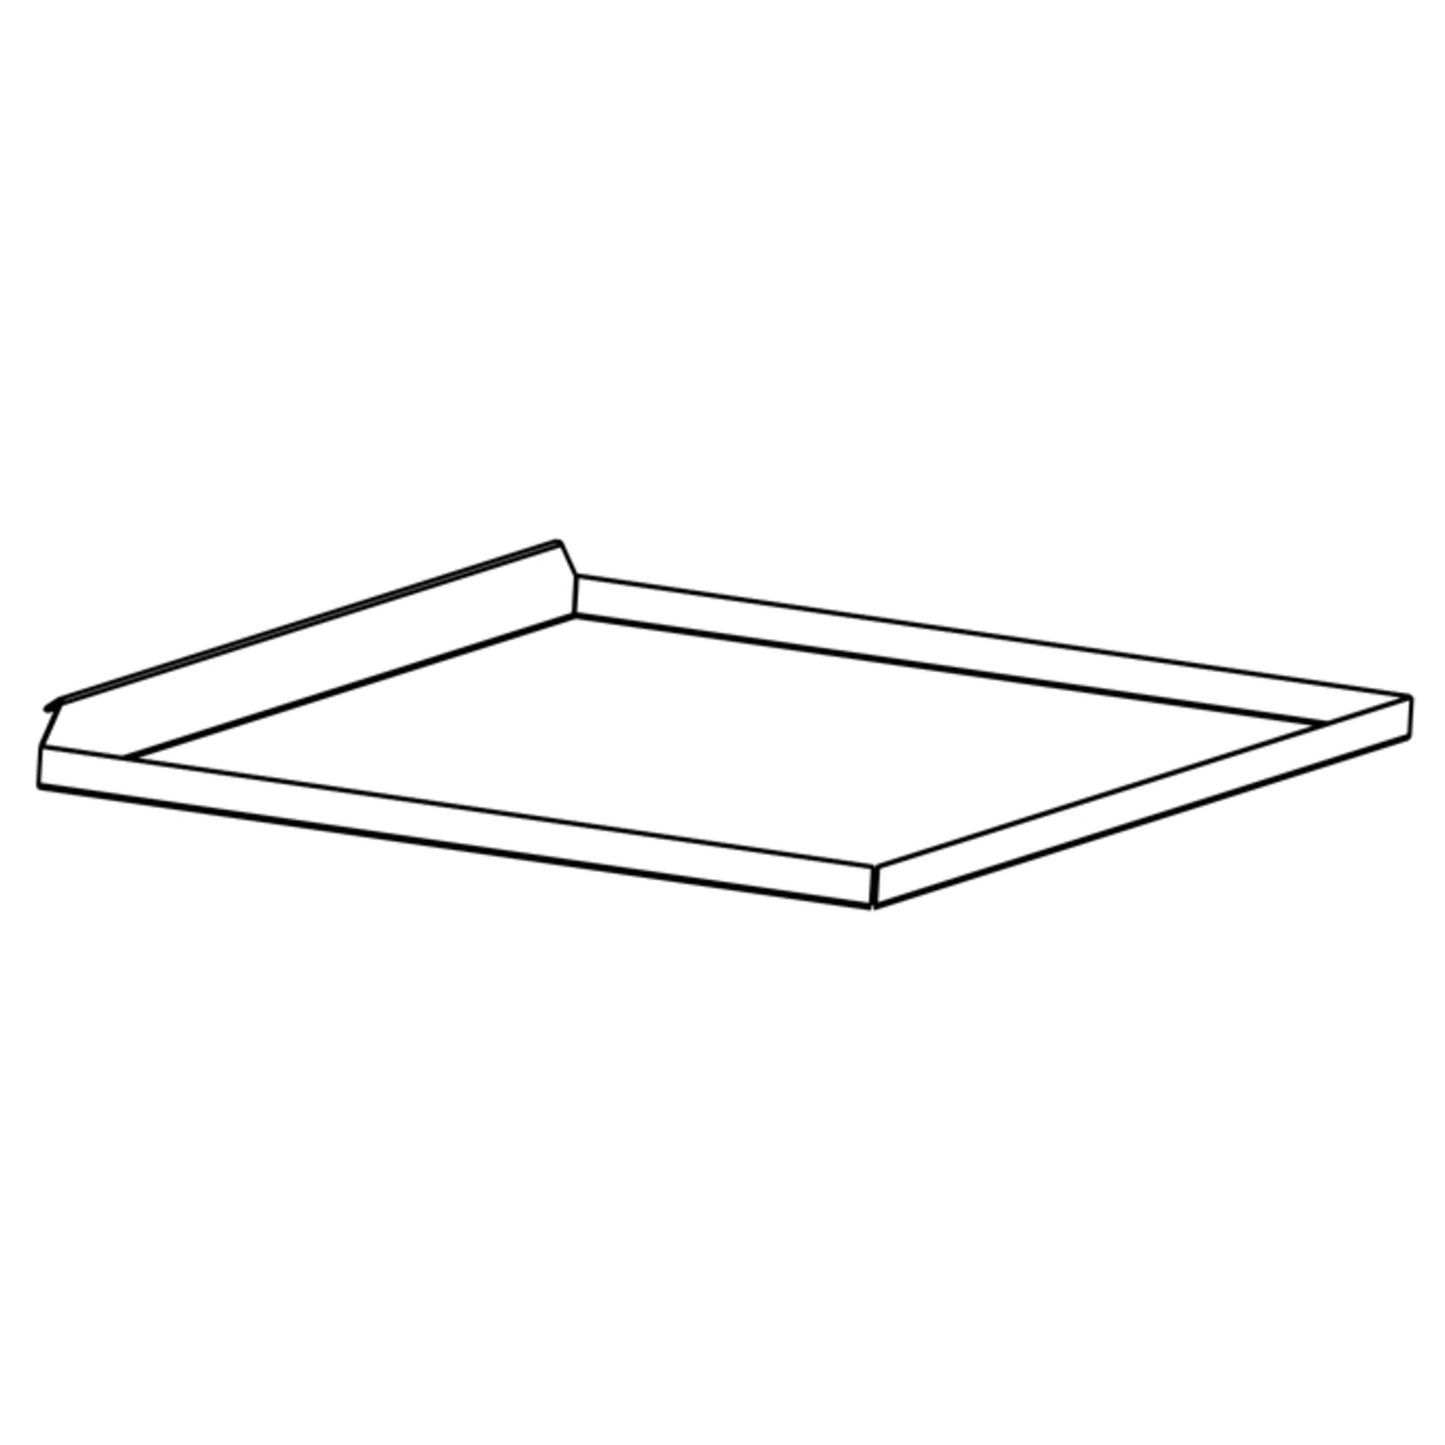 EHDG-P30 - Drip Tray for EHDG-11R